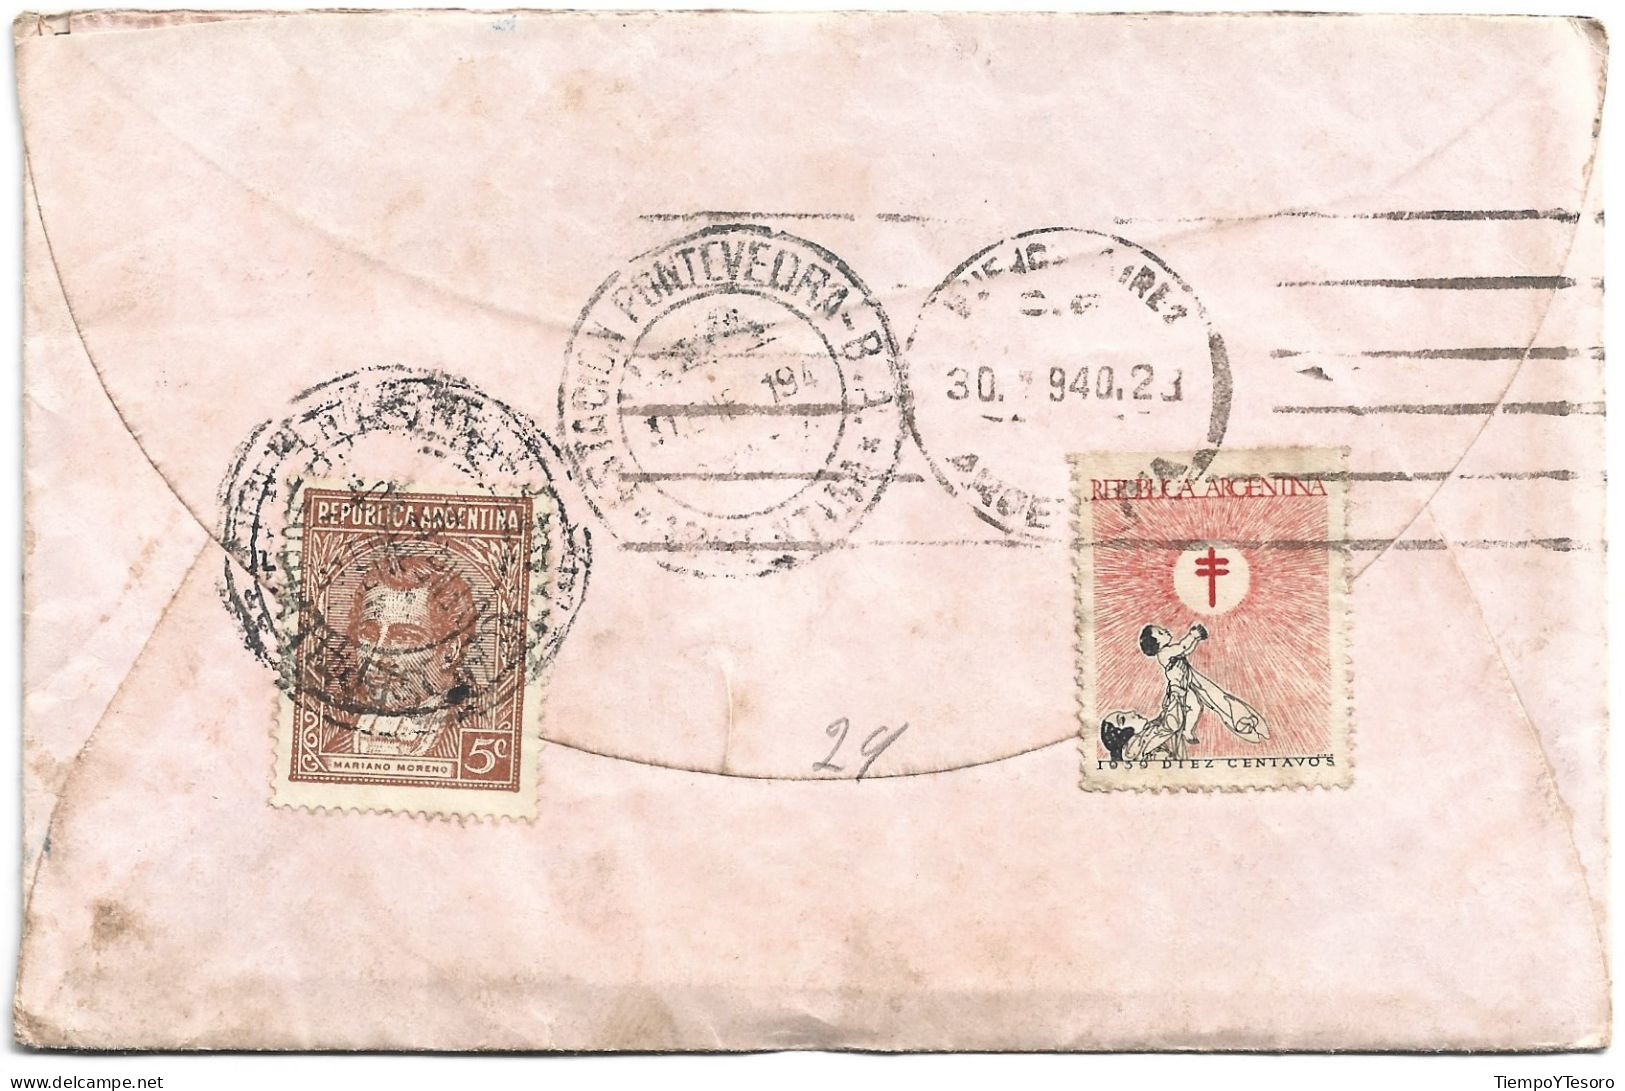 Correspondence - Argentina, Buenos Aires, 1940, Mariano Moreno Stamps & R. Arg N°1552 - Covers & Documents